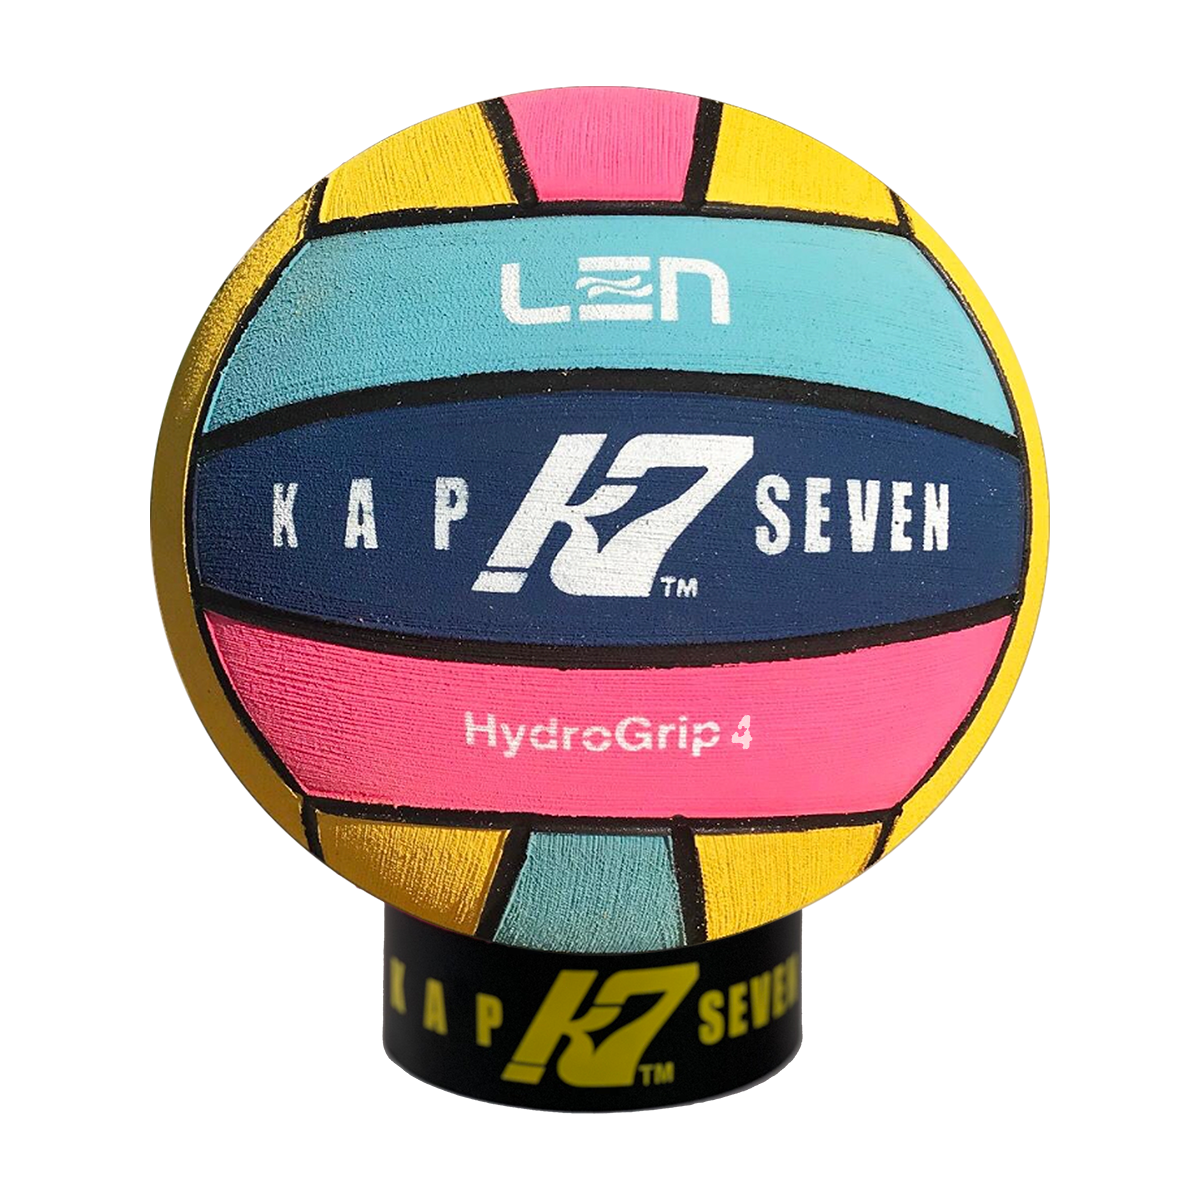 KAP7 LEN LIMITED EDITION Ball of the European Championships    Hydro-Grip Ball Size 4